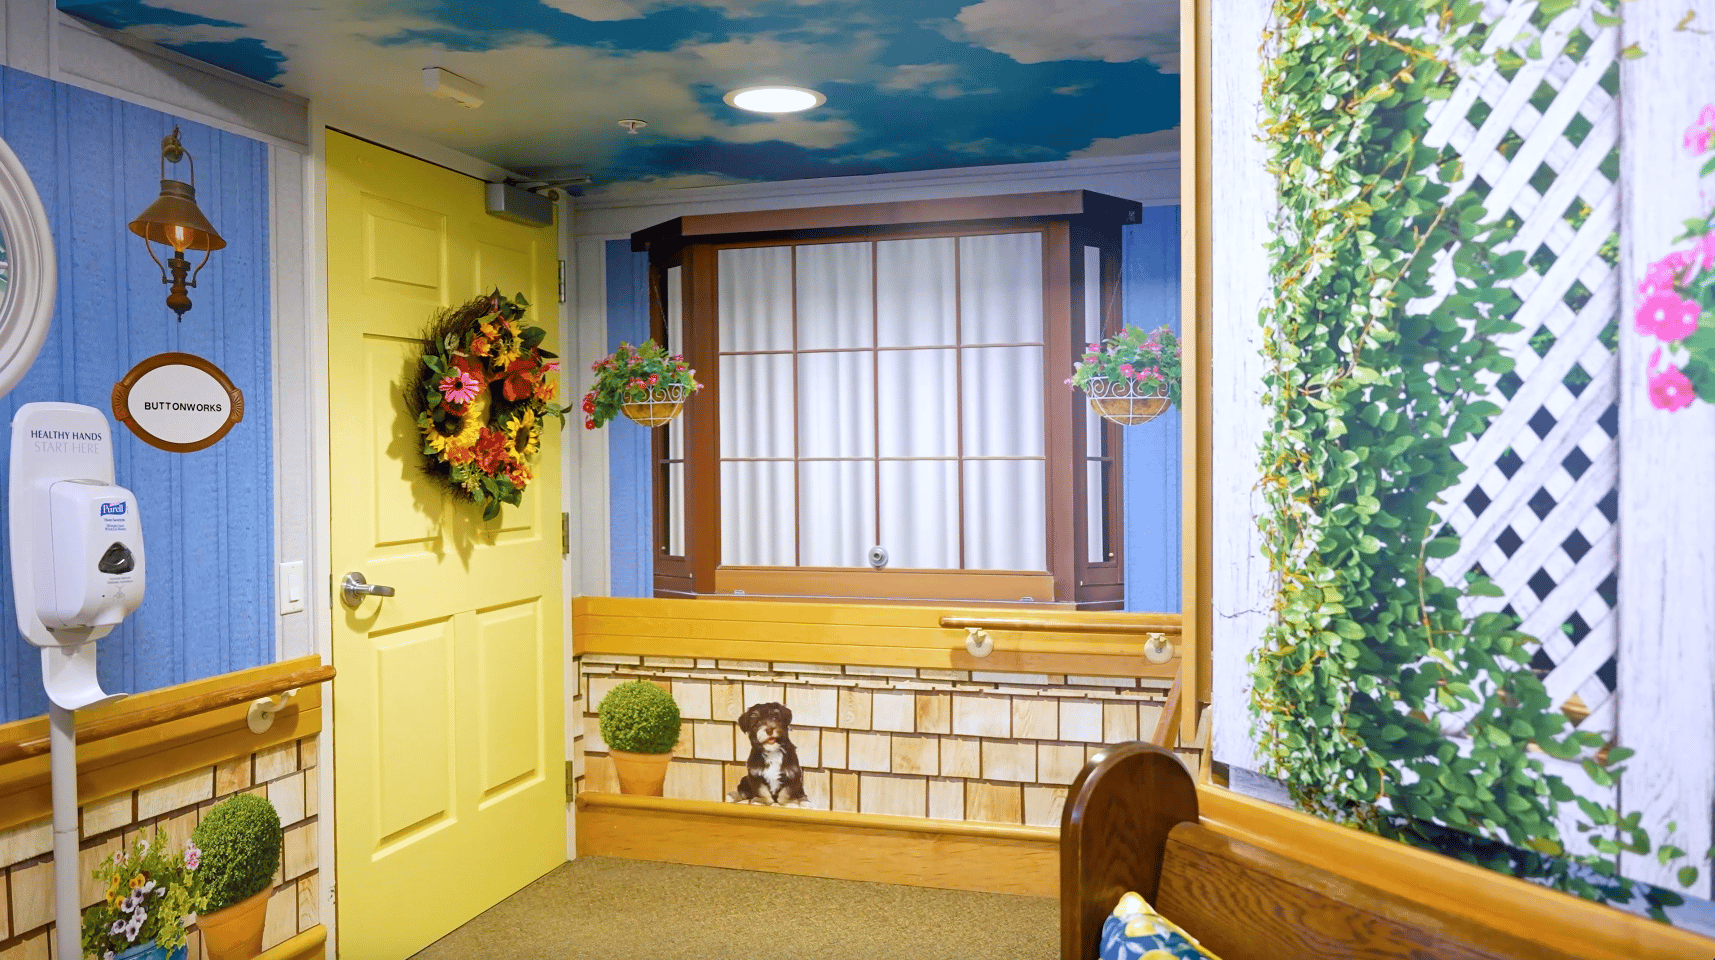 an image of the interior of Sunnyside Home with brightly painted murals